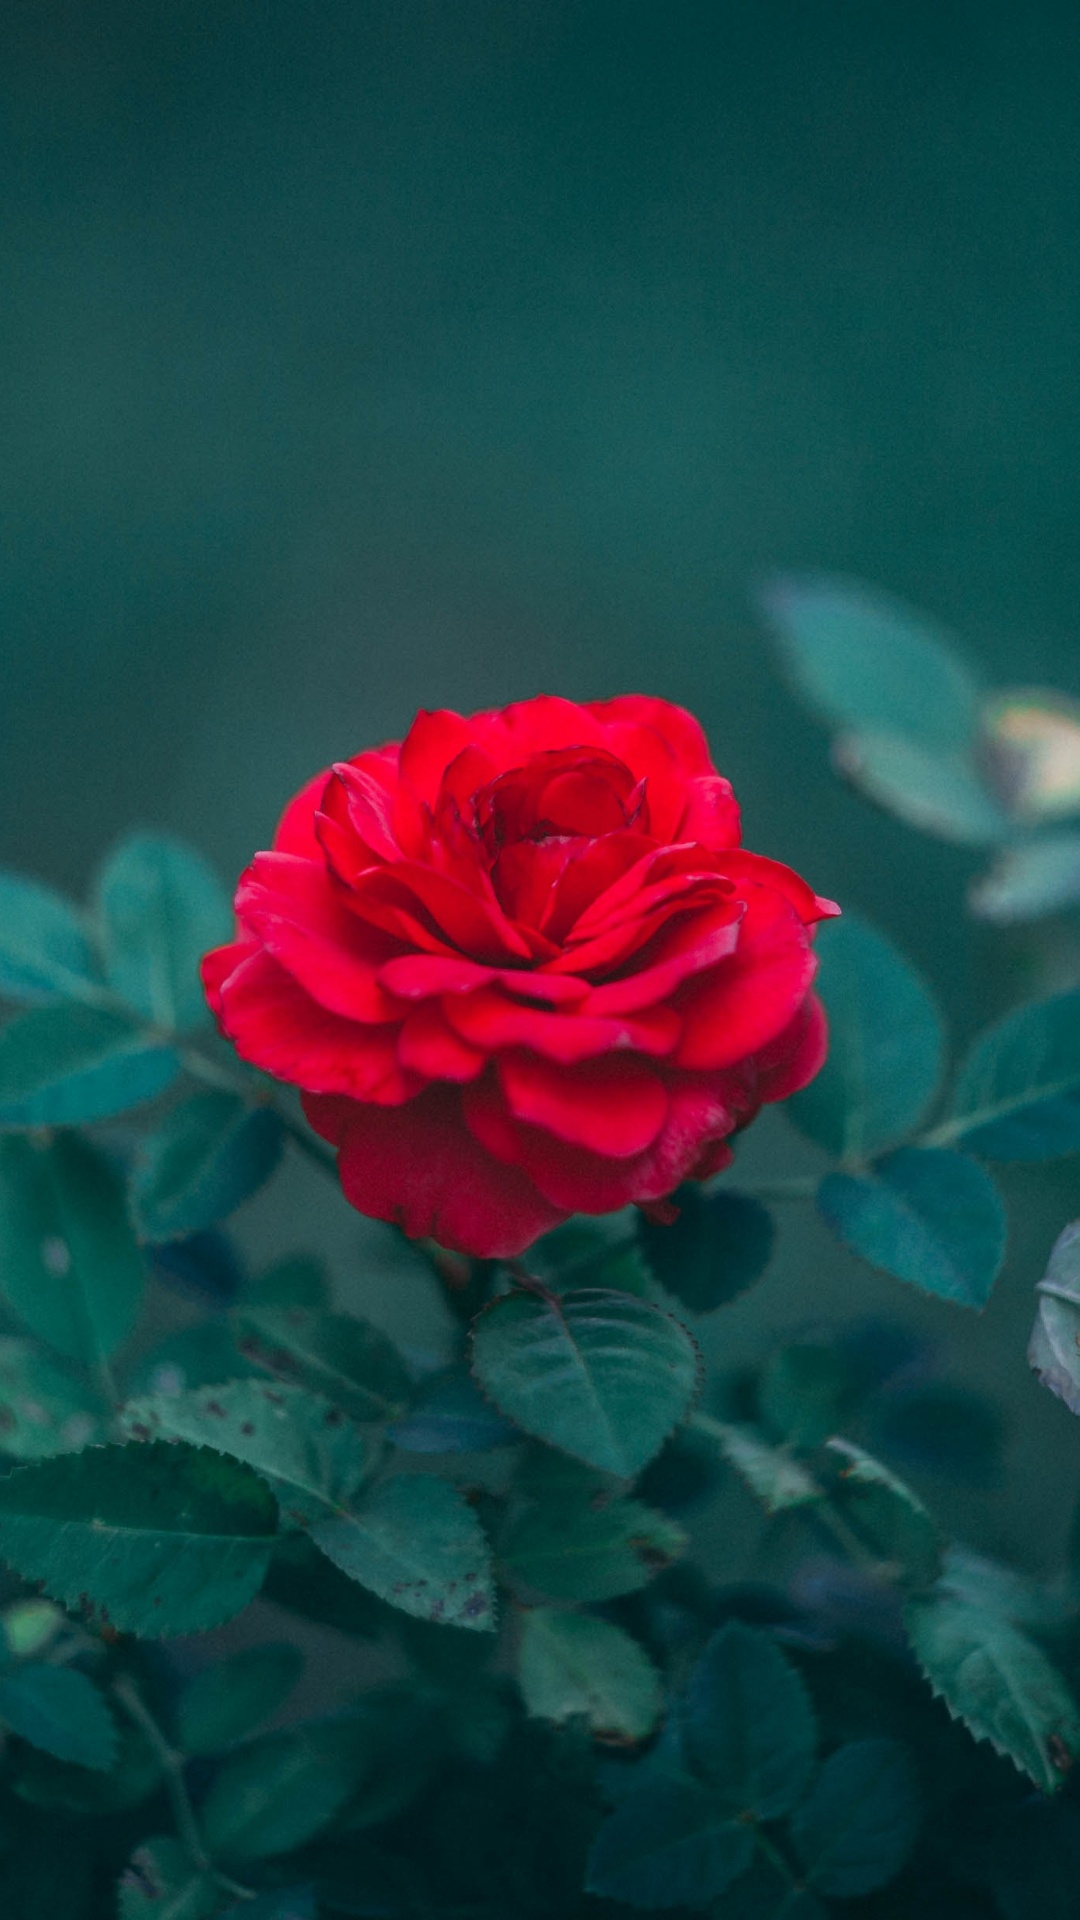 Red Rose in Bloom During Daytime. Wallpaper in 1080x1920 Resolution